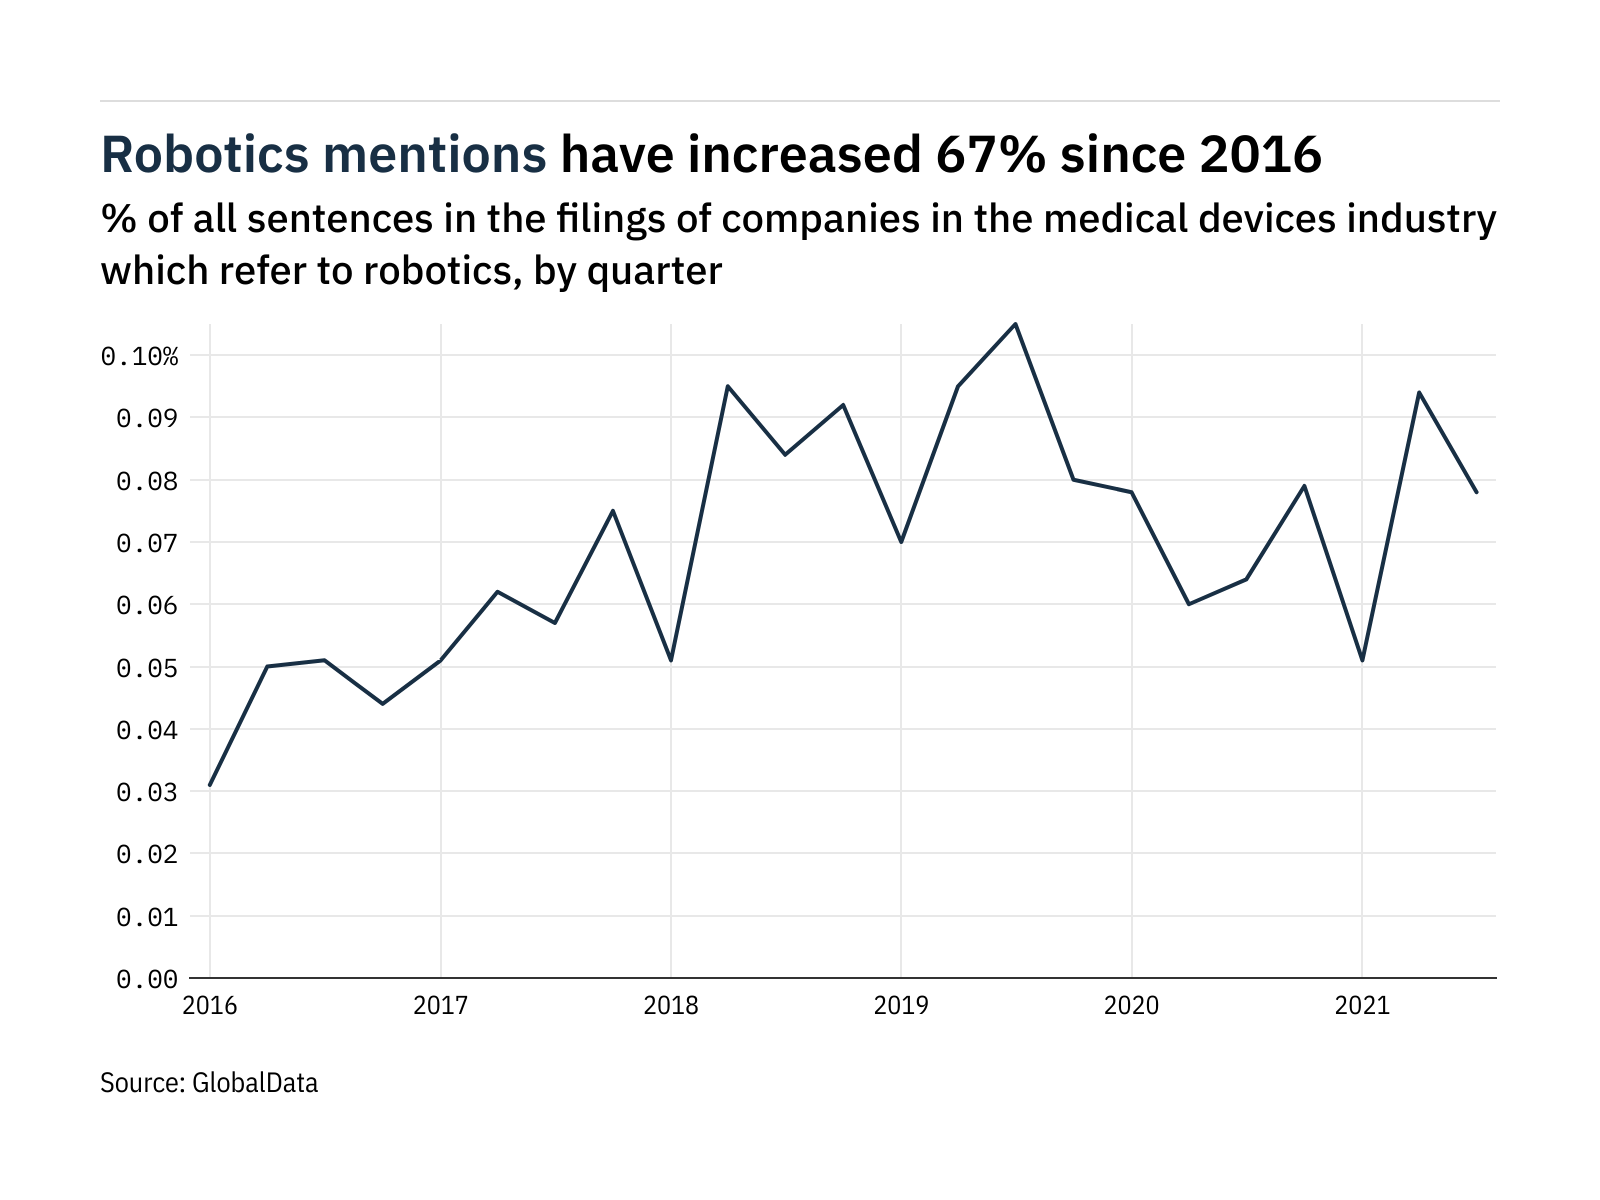 Filings buzz in the medical devices industry: 17% decrease in robotics mentions in Q3 of 2021